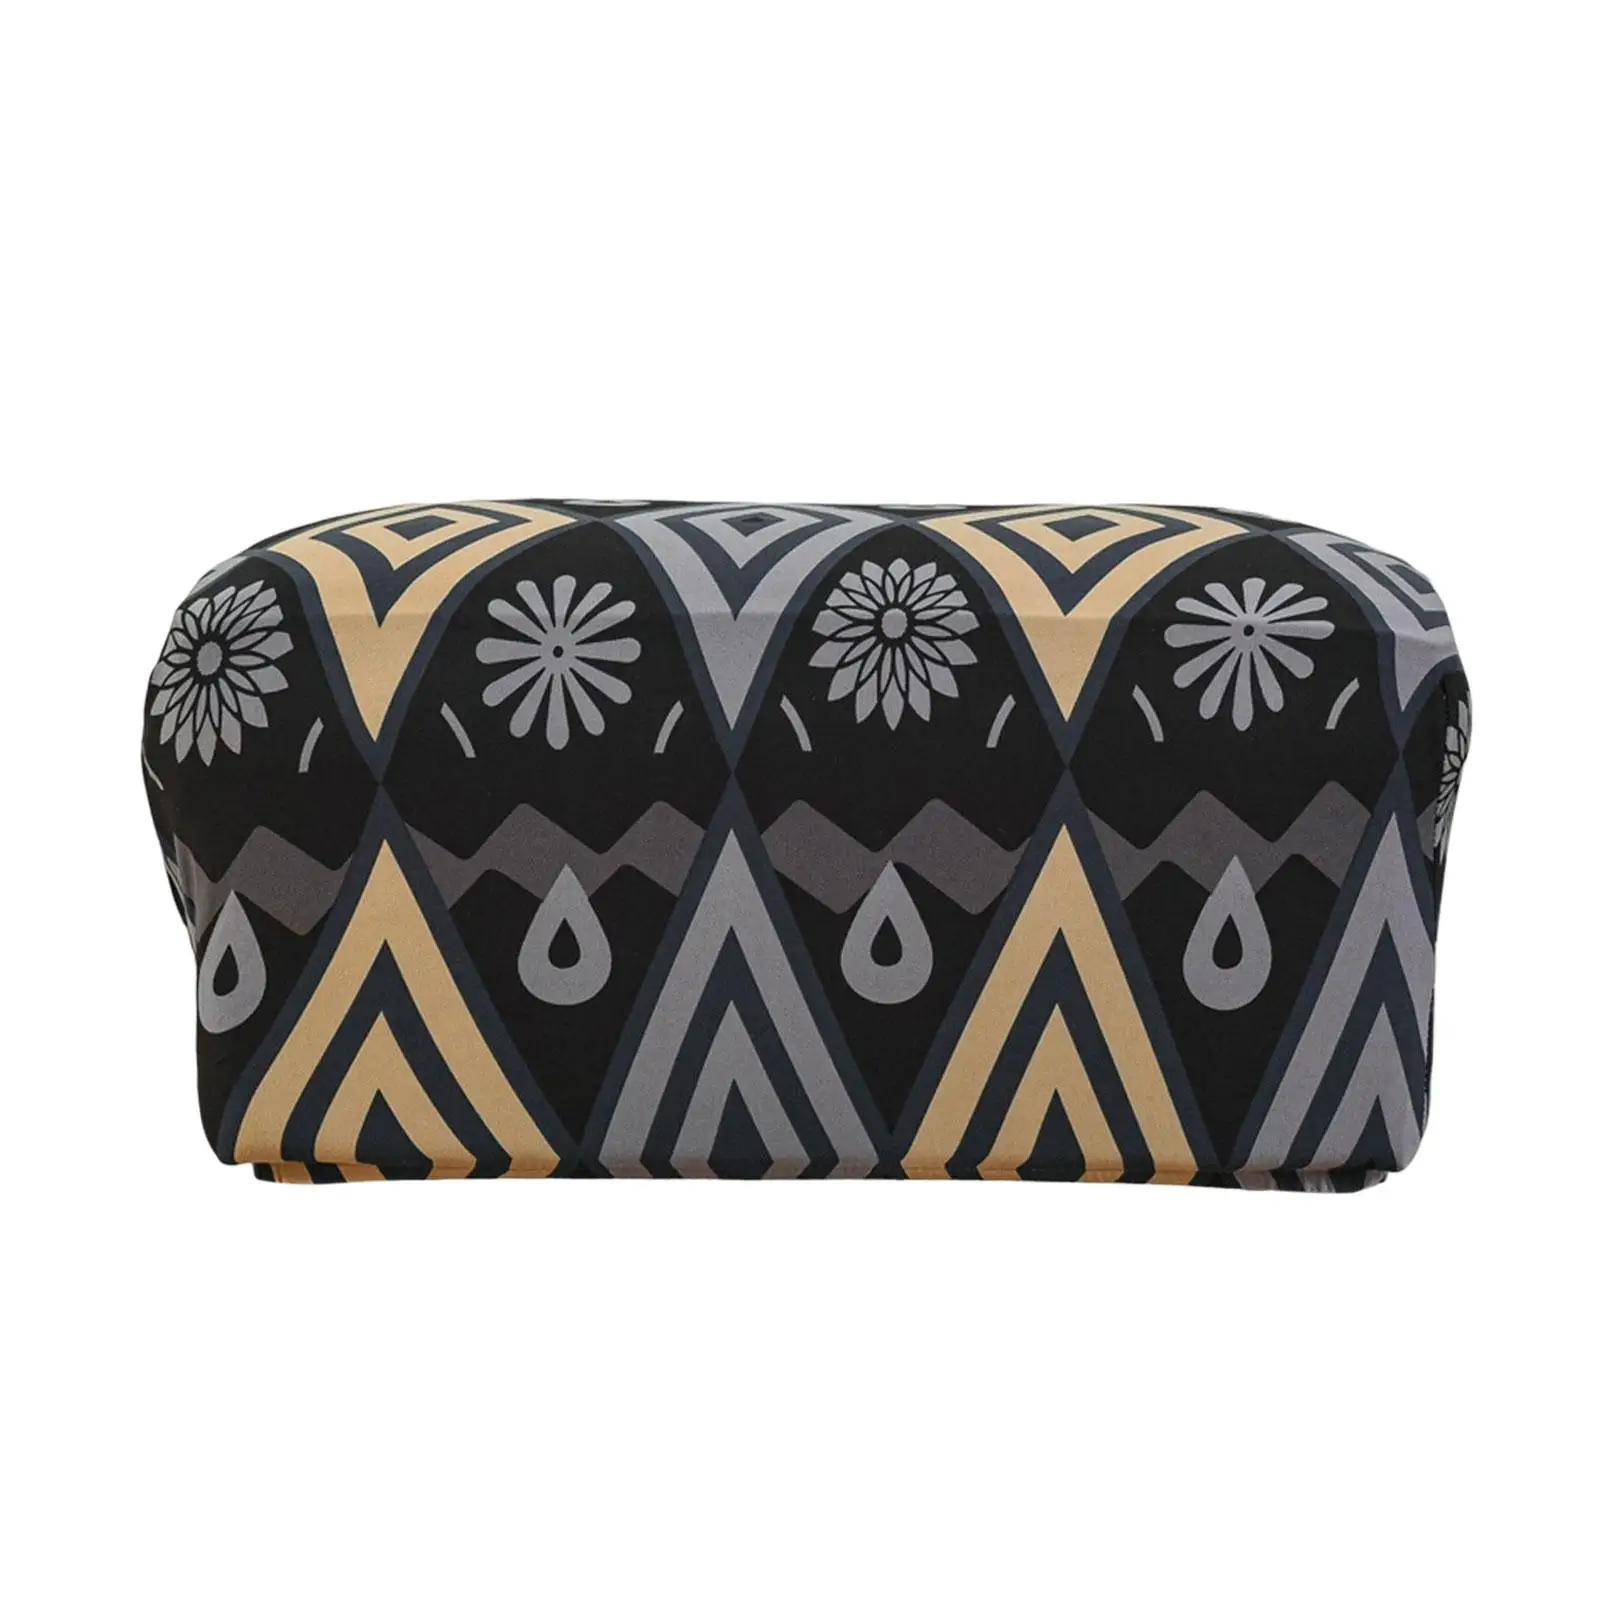 Stretch Ottoman Covers Printed Protector Cover Nonslip Modern Living Room